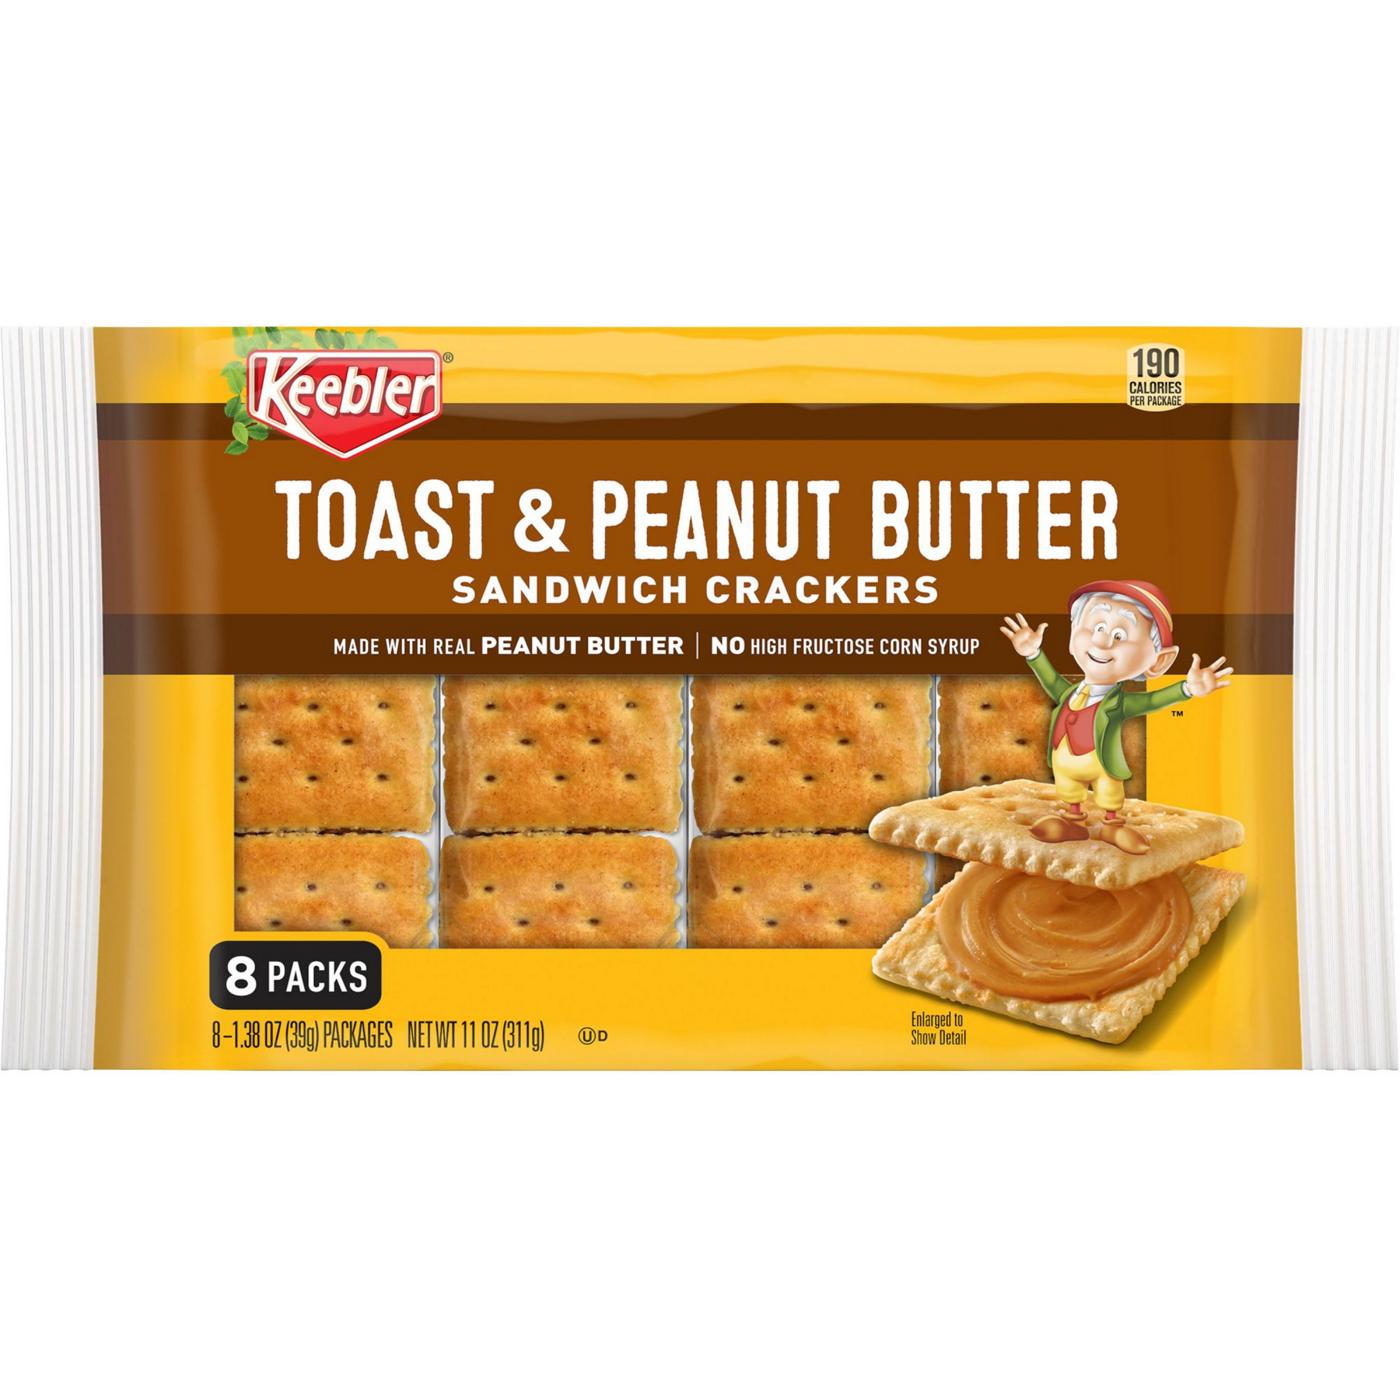 Keebler Toast and Peanut Butter Sandwich Crackers; image 1 of 4